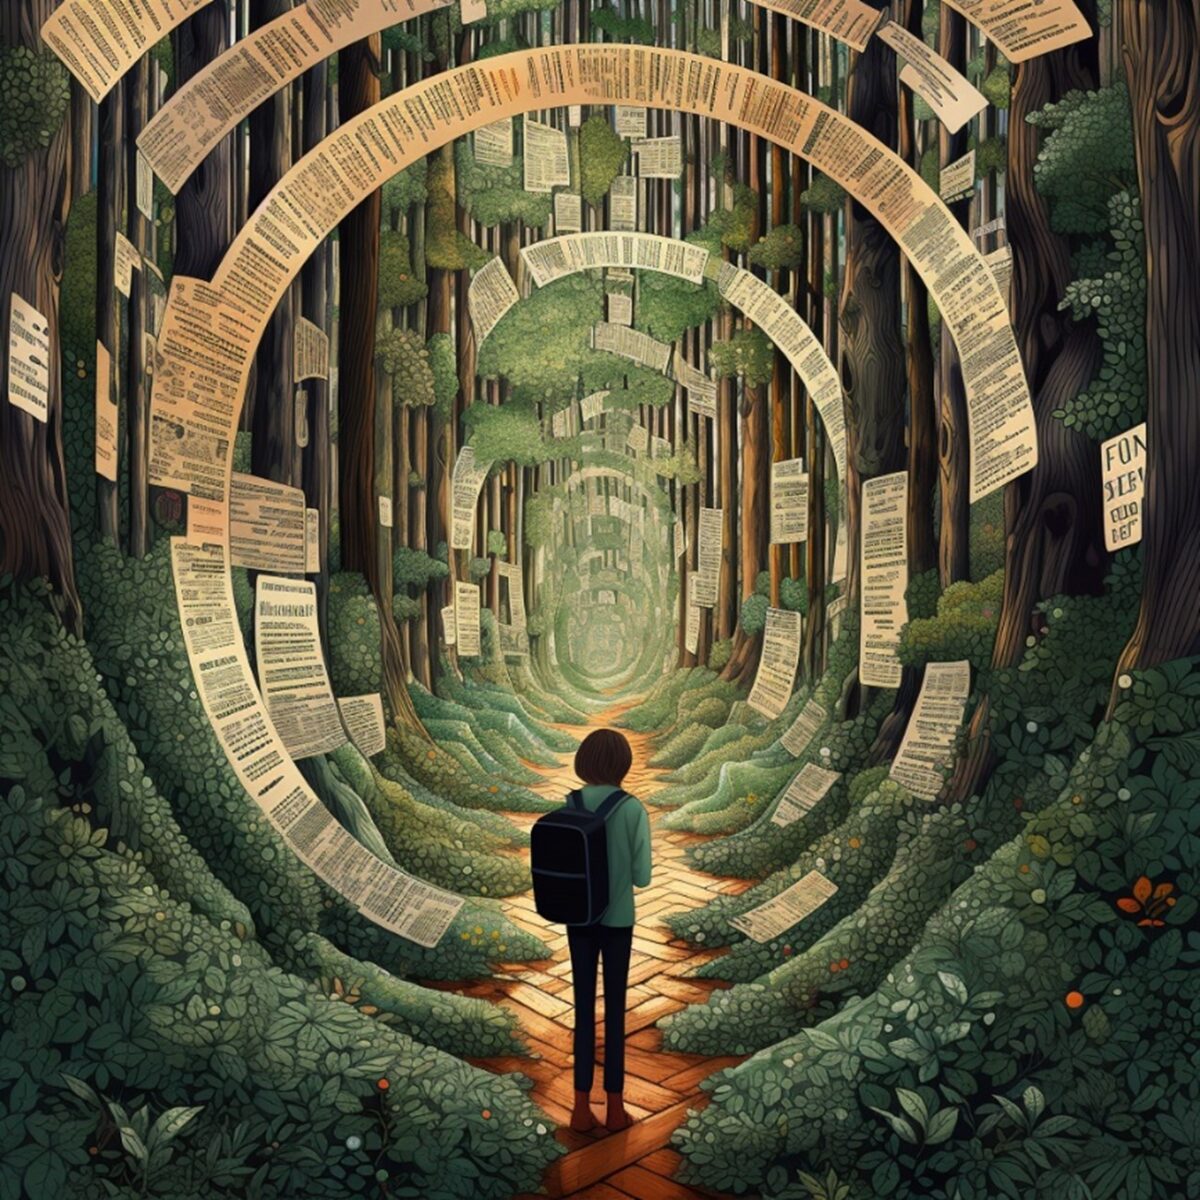 Illustration of dense forest with scrolls instead of trees